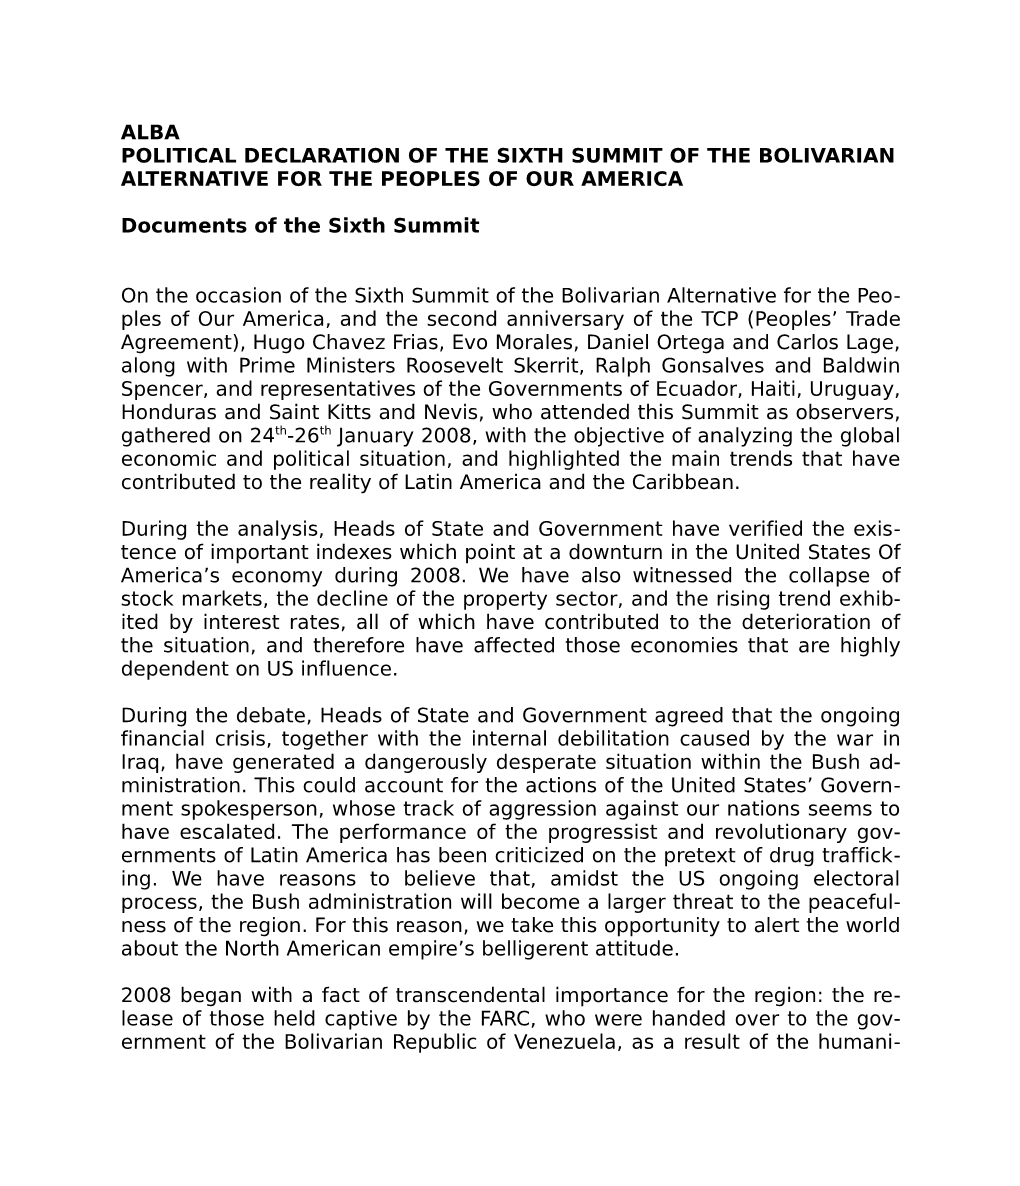 ALBA POLITICAL DECLARATION of the SIXTH SUMMIT of the BOLIVARIAN ALTERNATIVE for the PEOPLES of OUR AMERICA Documents of The